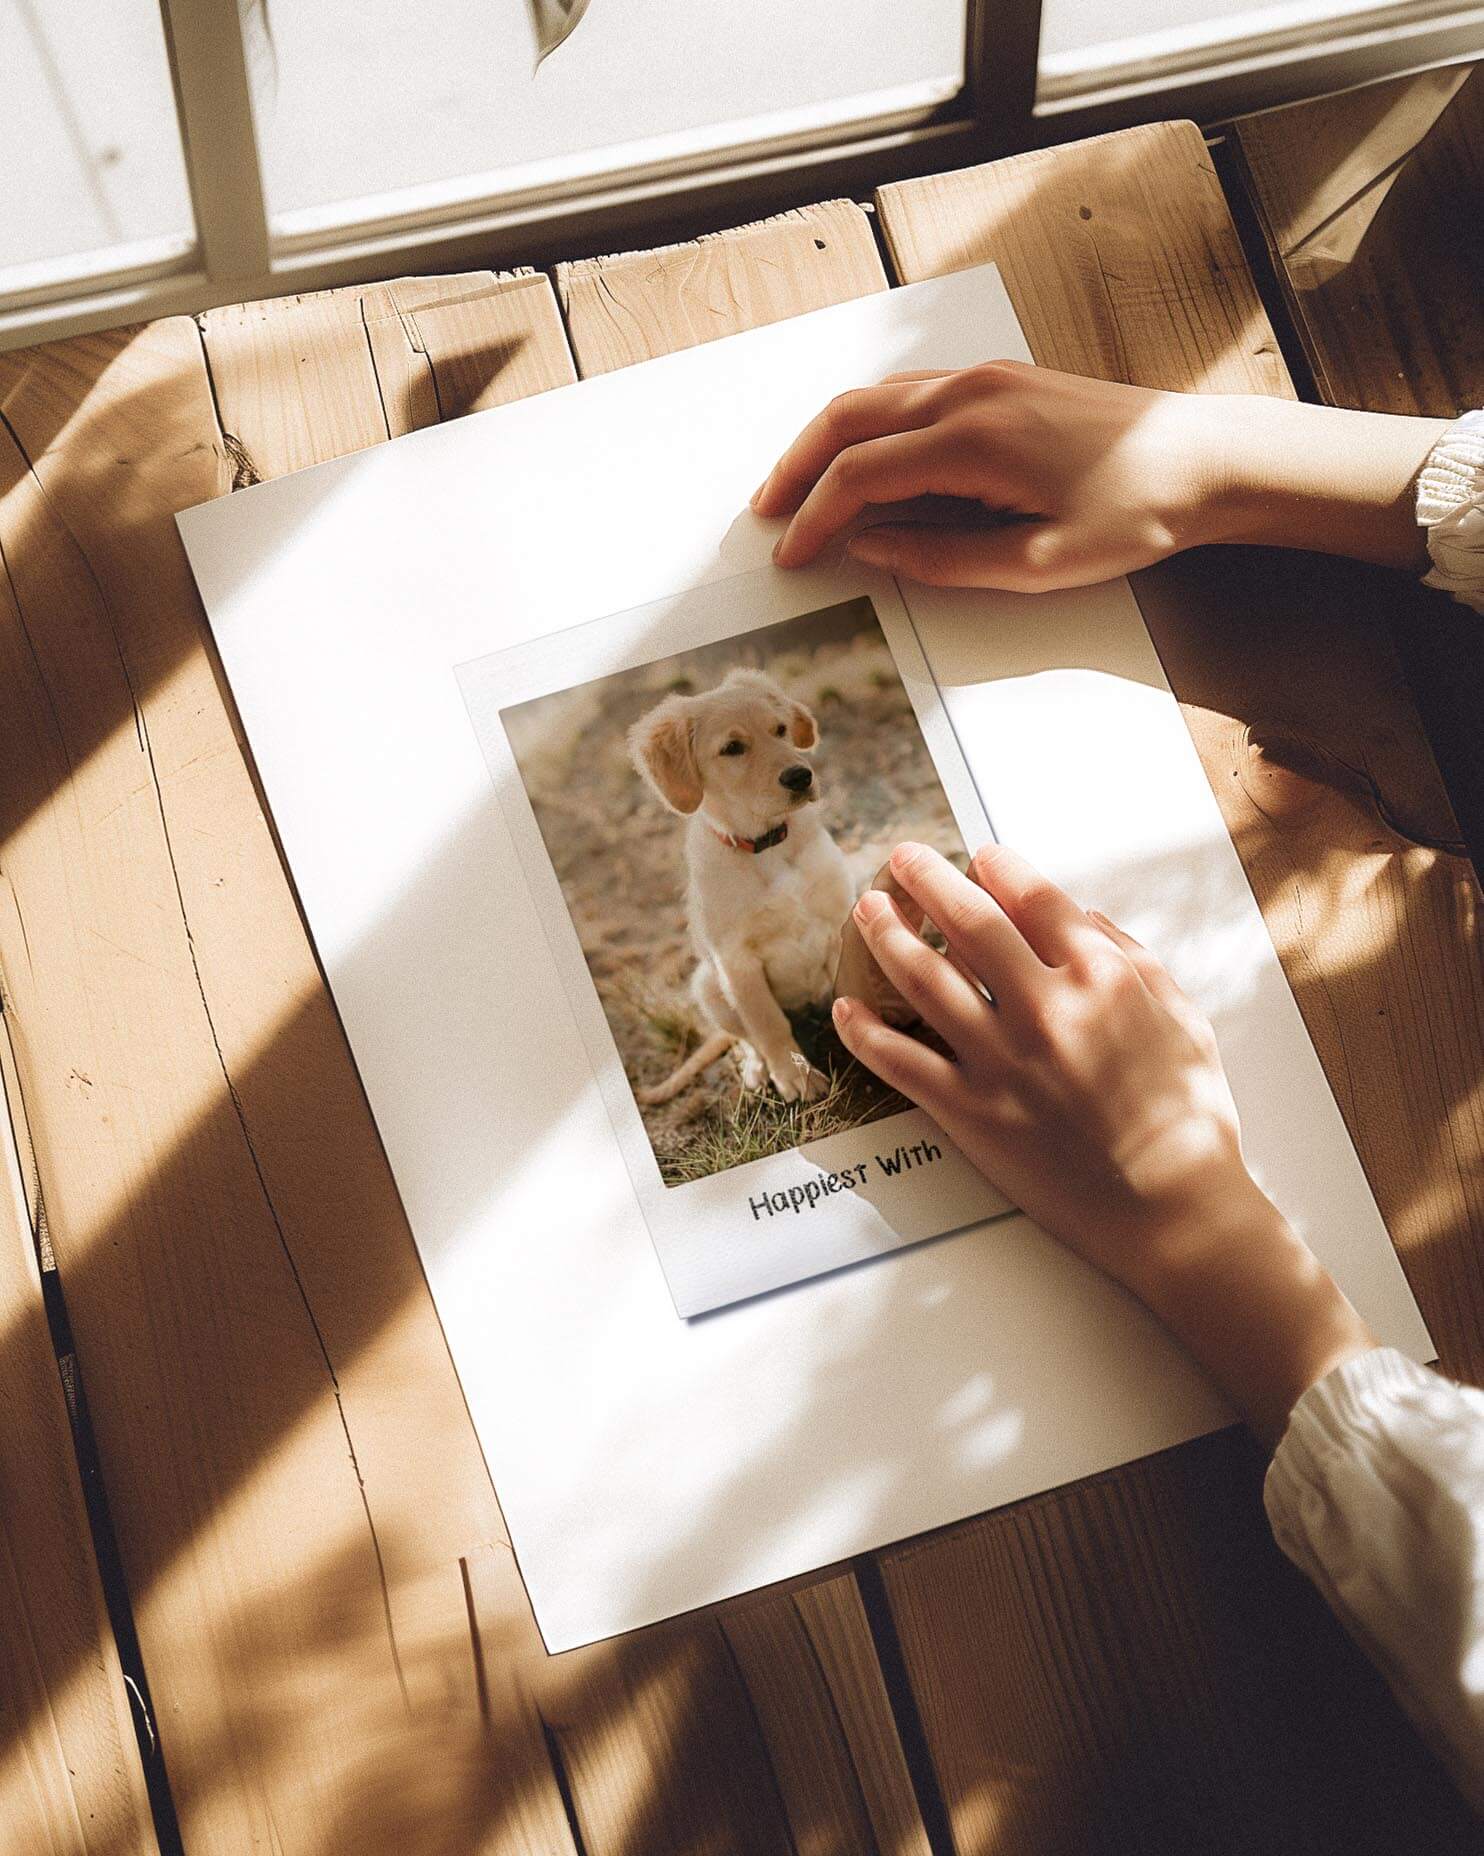 custom dog photo turned into instant film framed print in modern interior home decor. art made by vogue paws personalized pet portrait art made for gift ideas for dog mom and dog dad pet parents or as a pet memorial sympathy gift idea